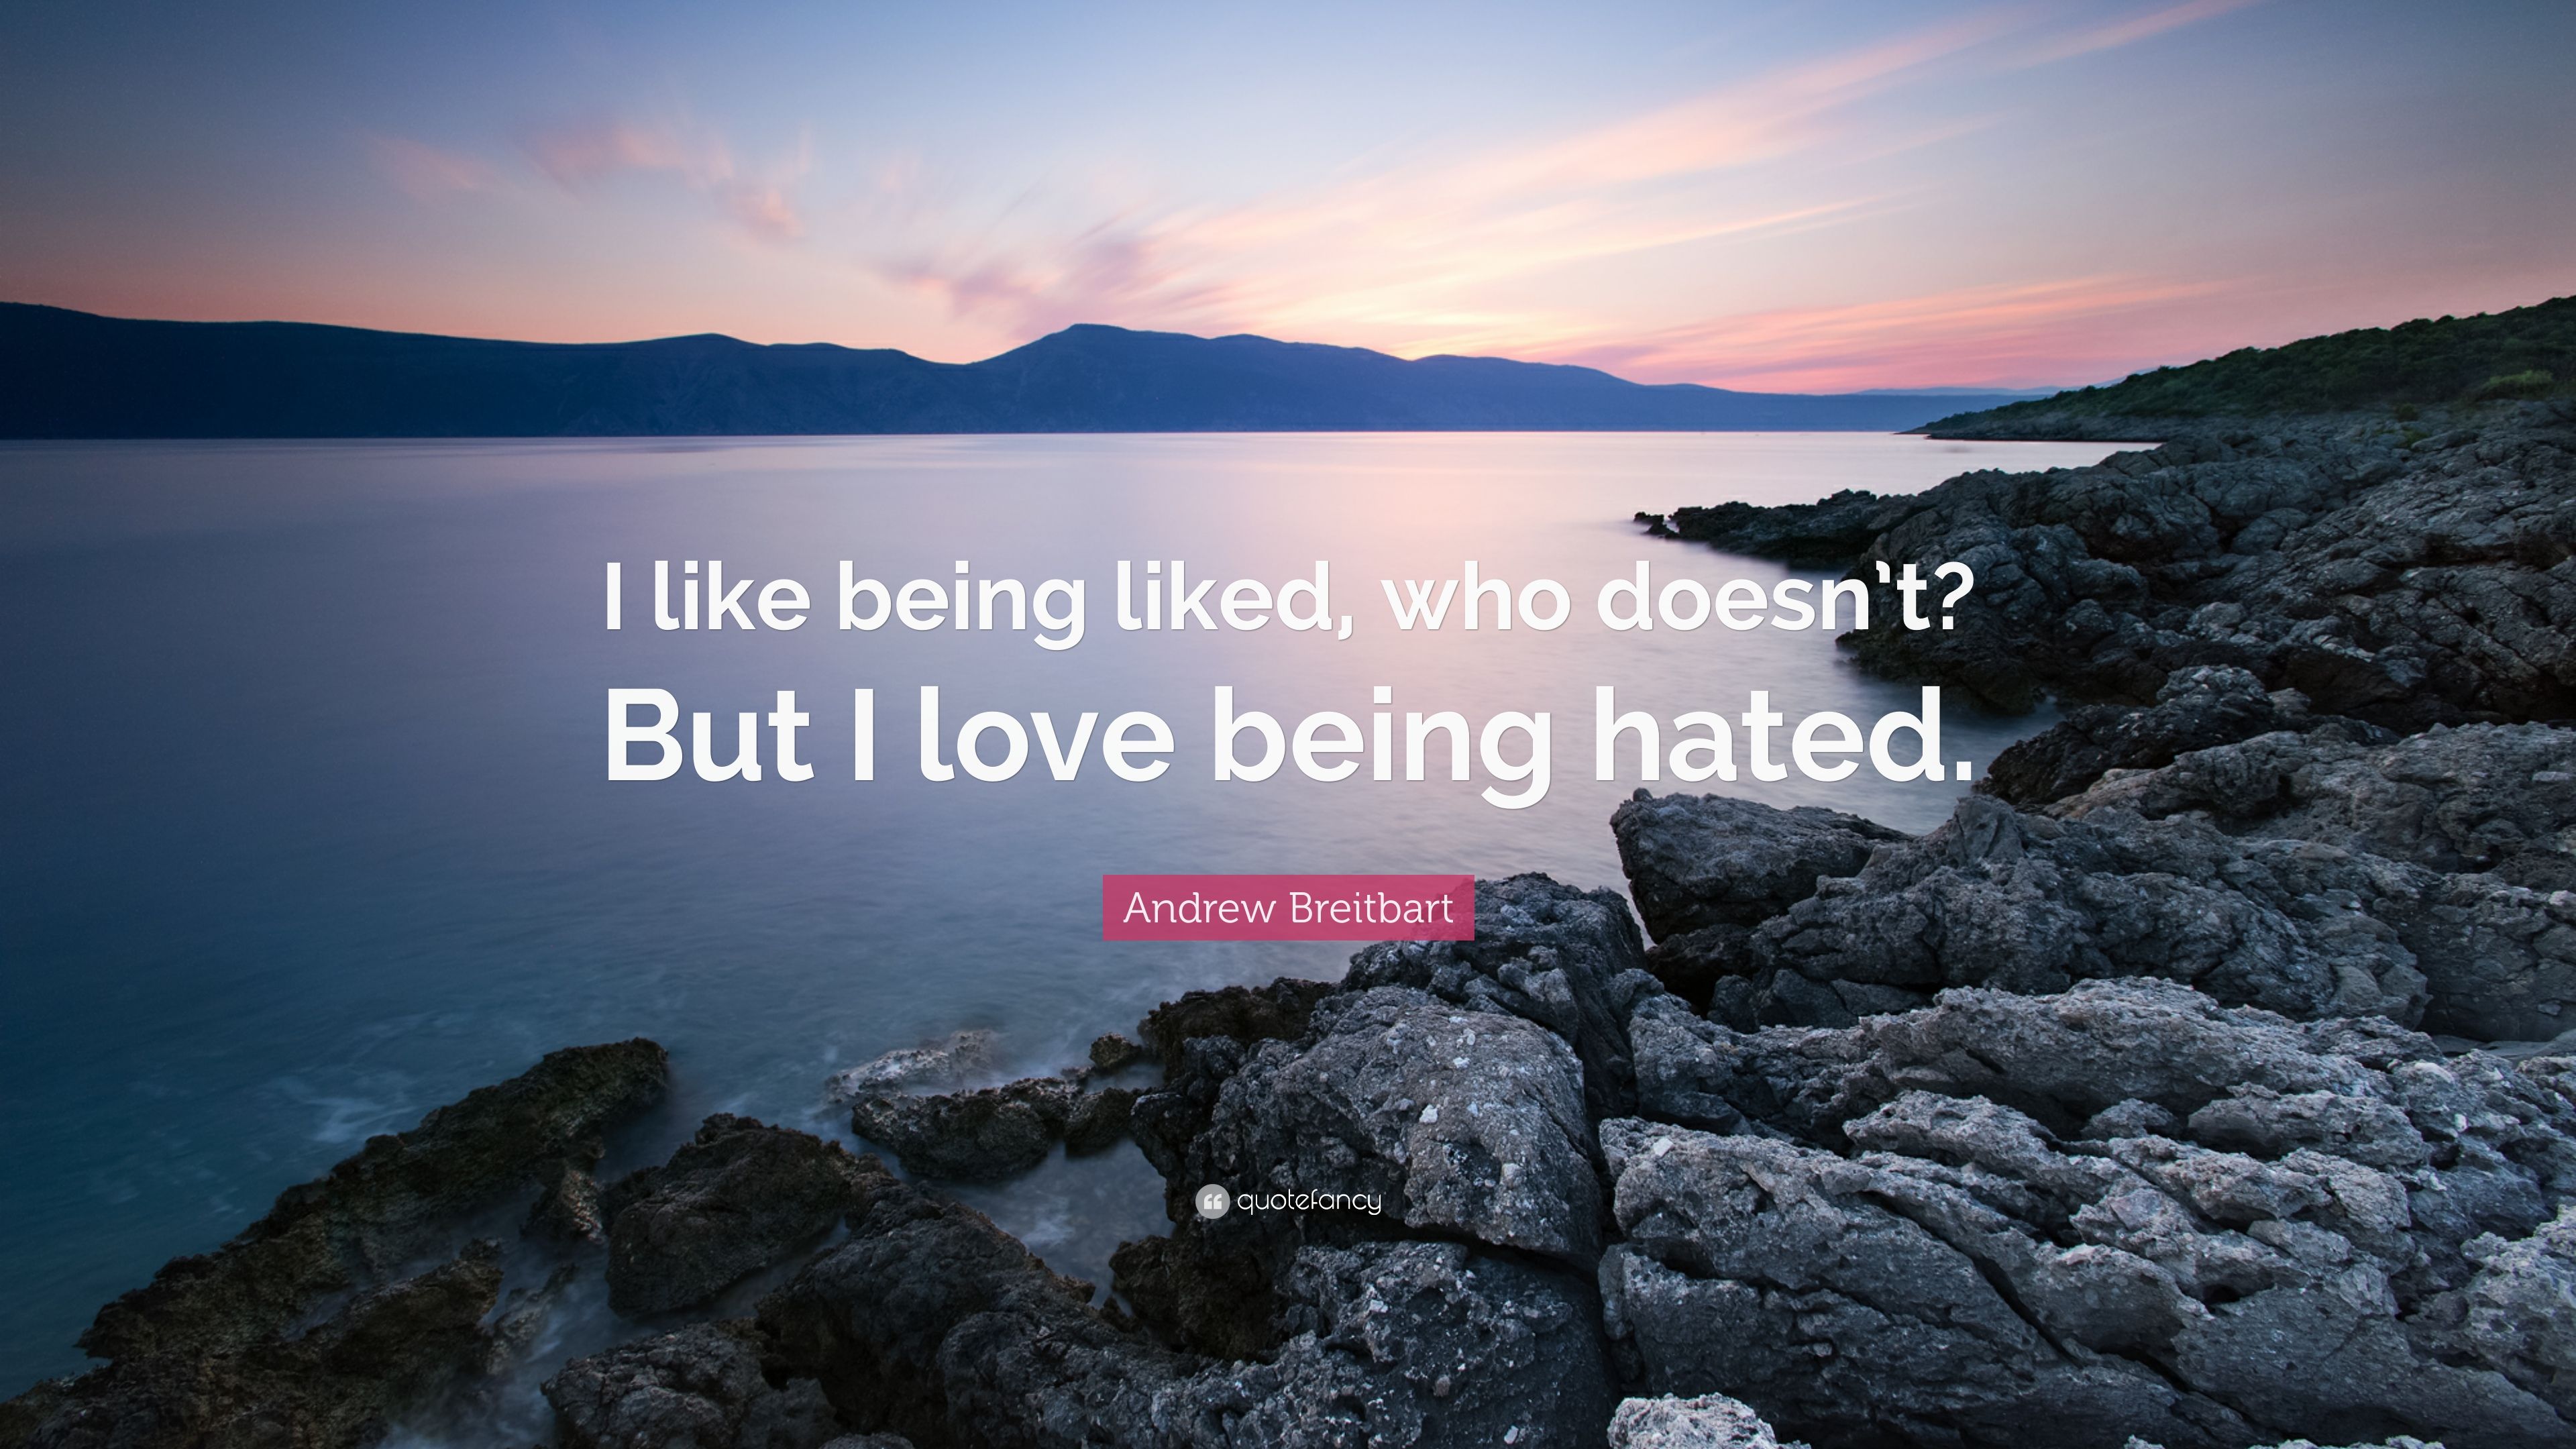 Andrew Breitbart Quote: “I like being liked, who doesn't? But I